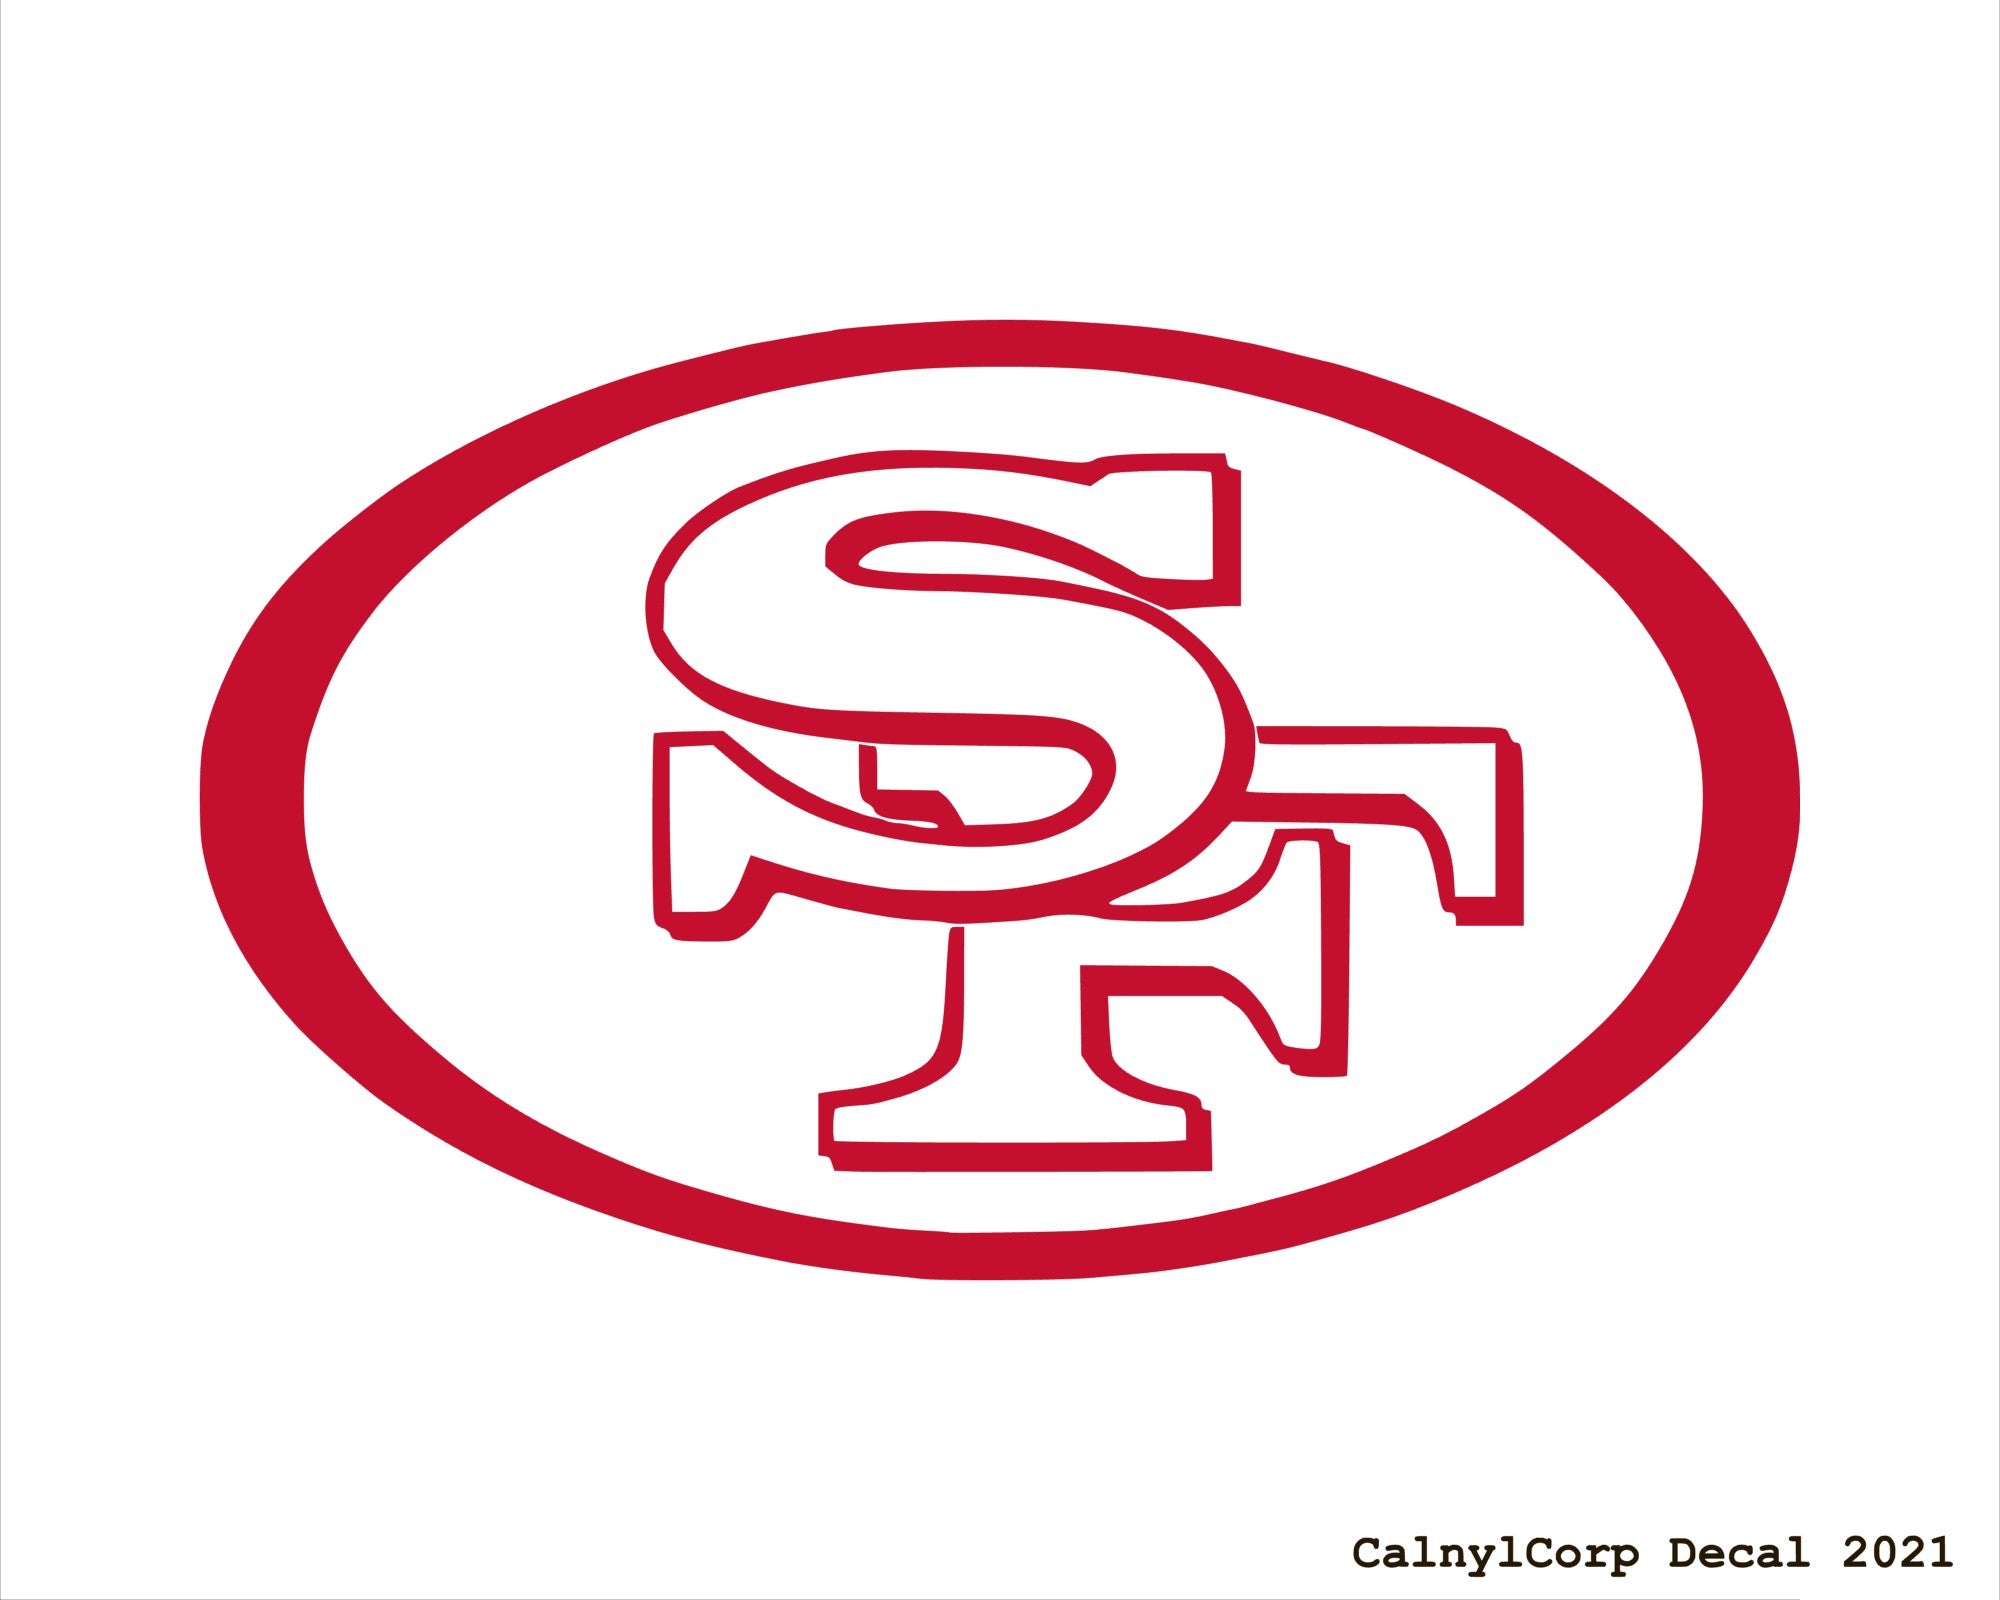 49ers Stickers